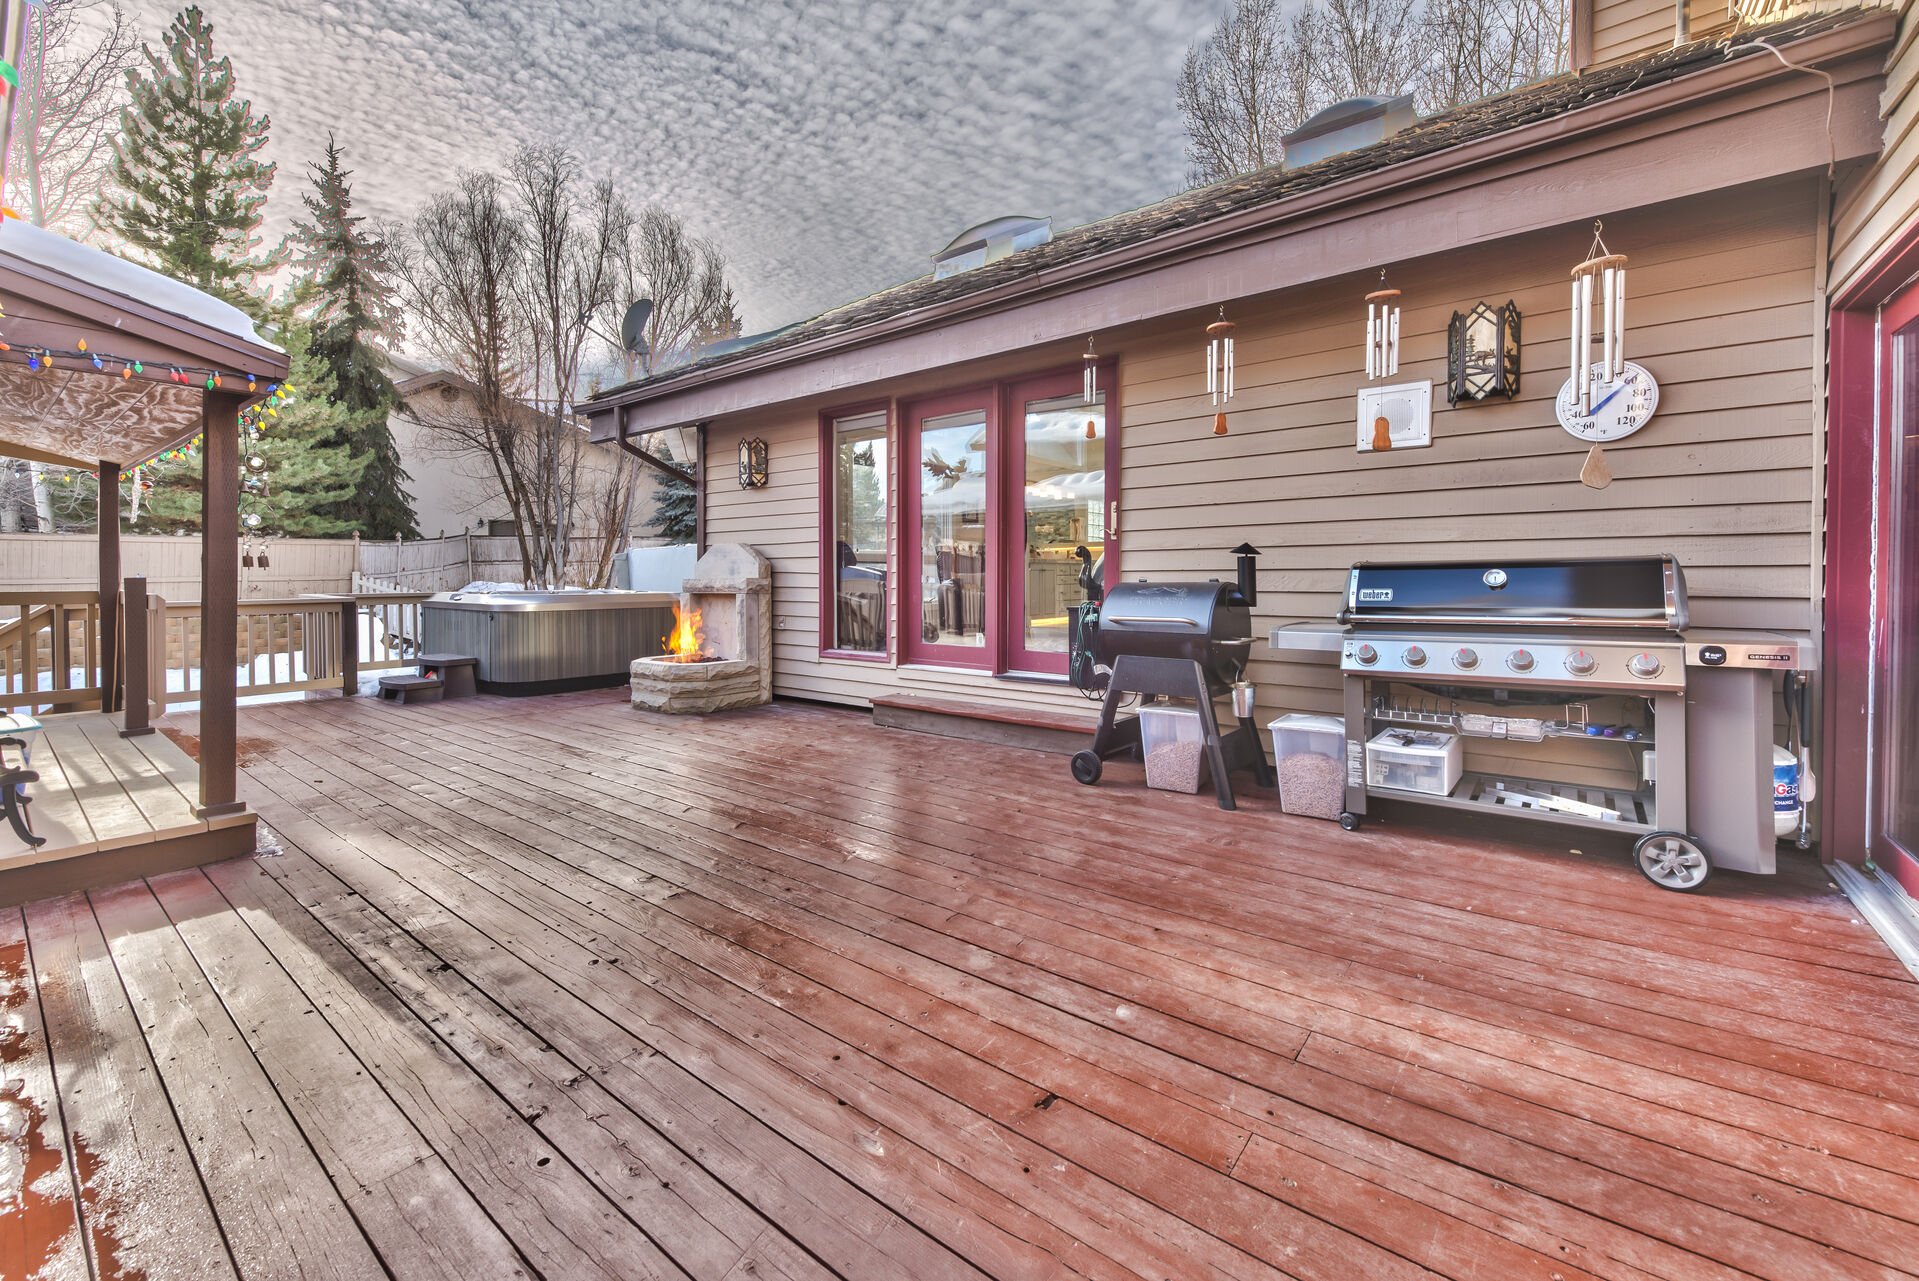 Spacious private deck with two stainless steel BBQ grills, hot tub and kids playhouse, and large back yard